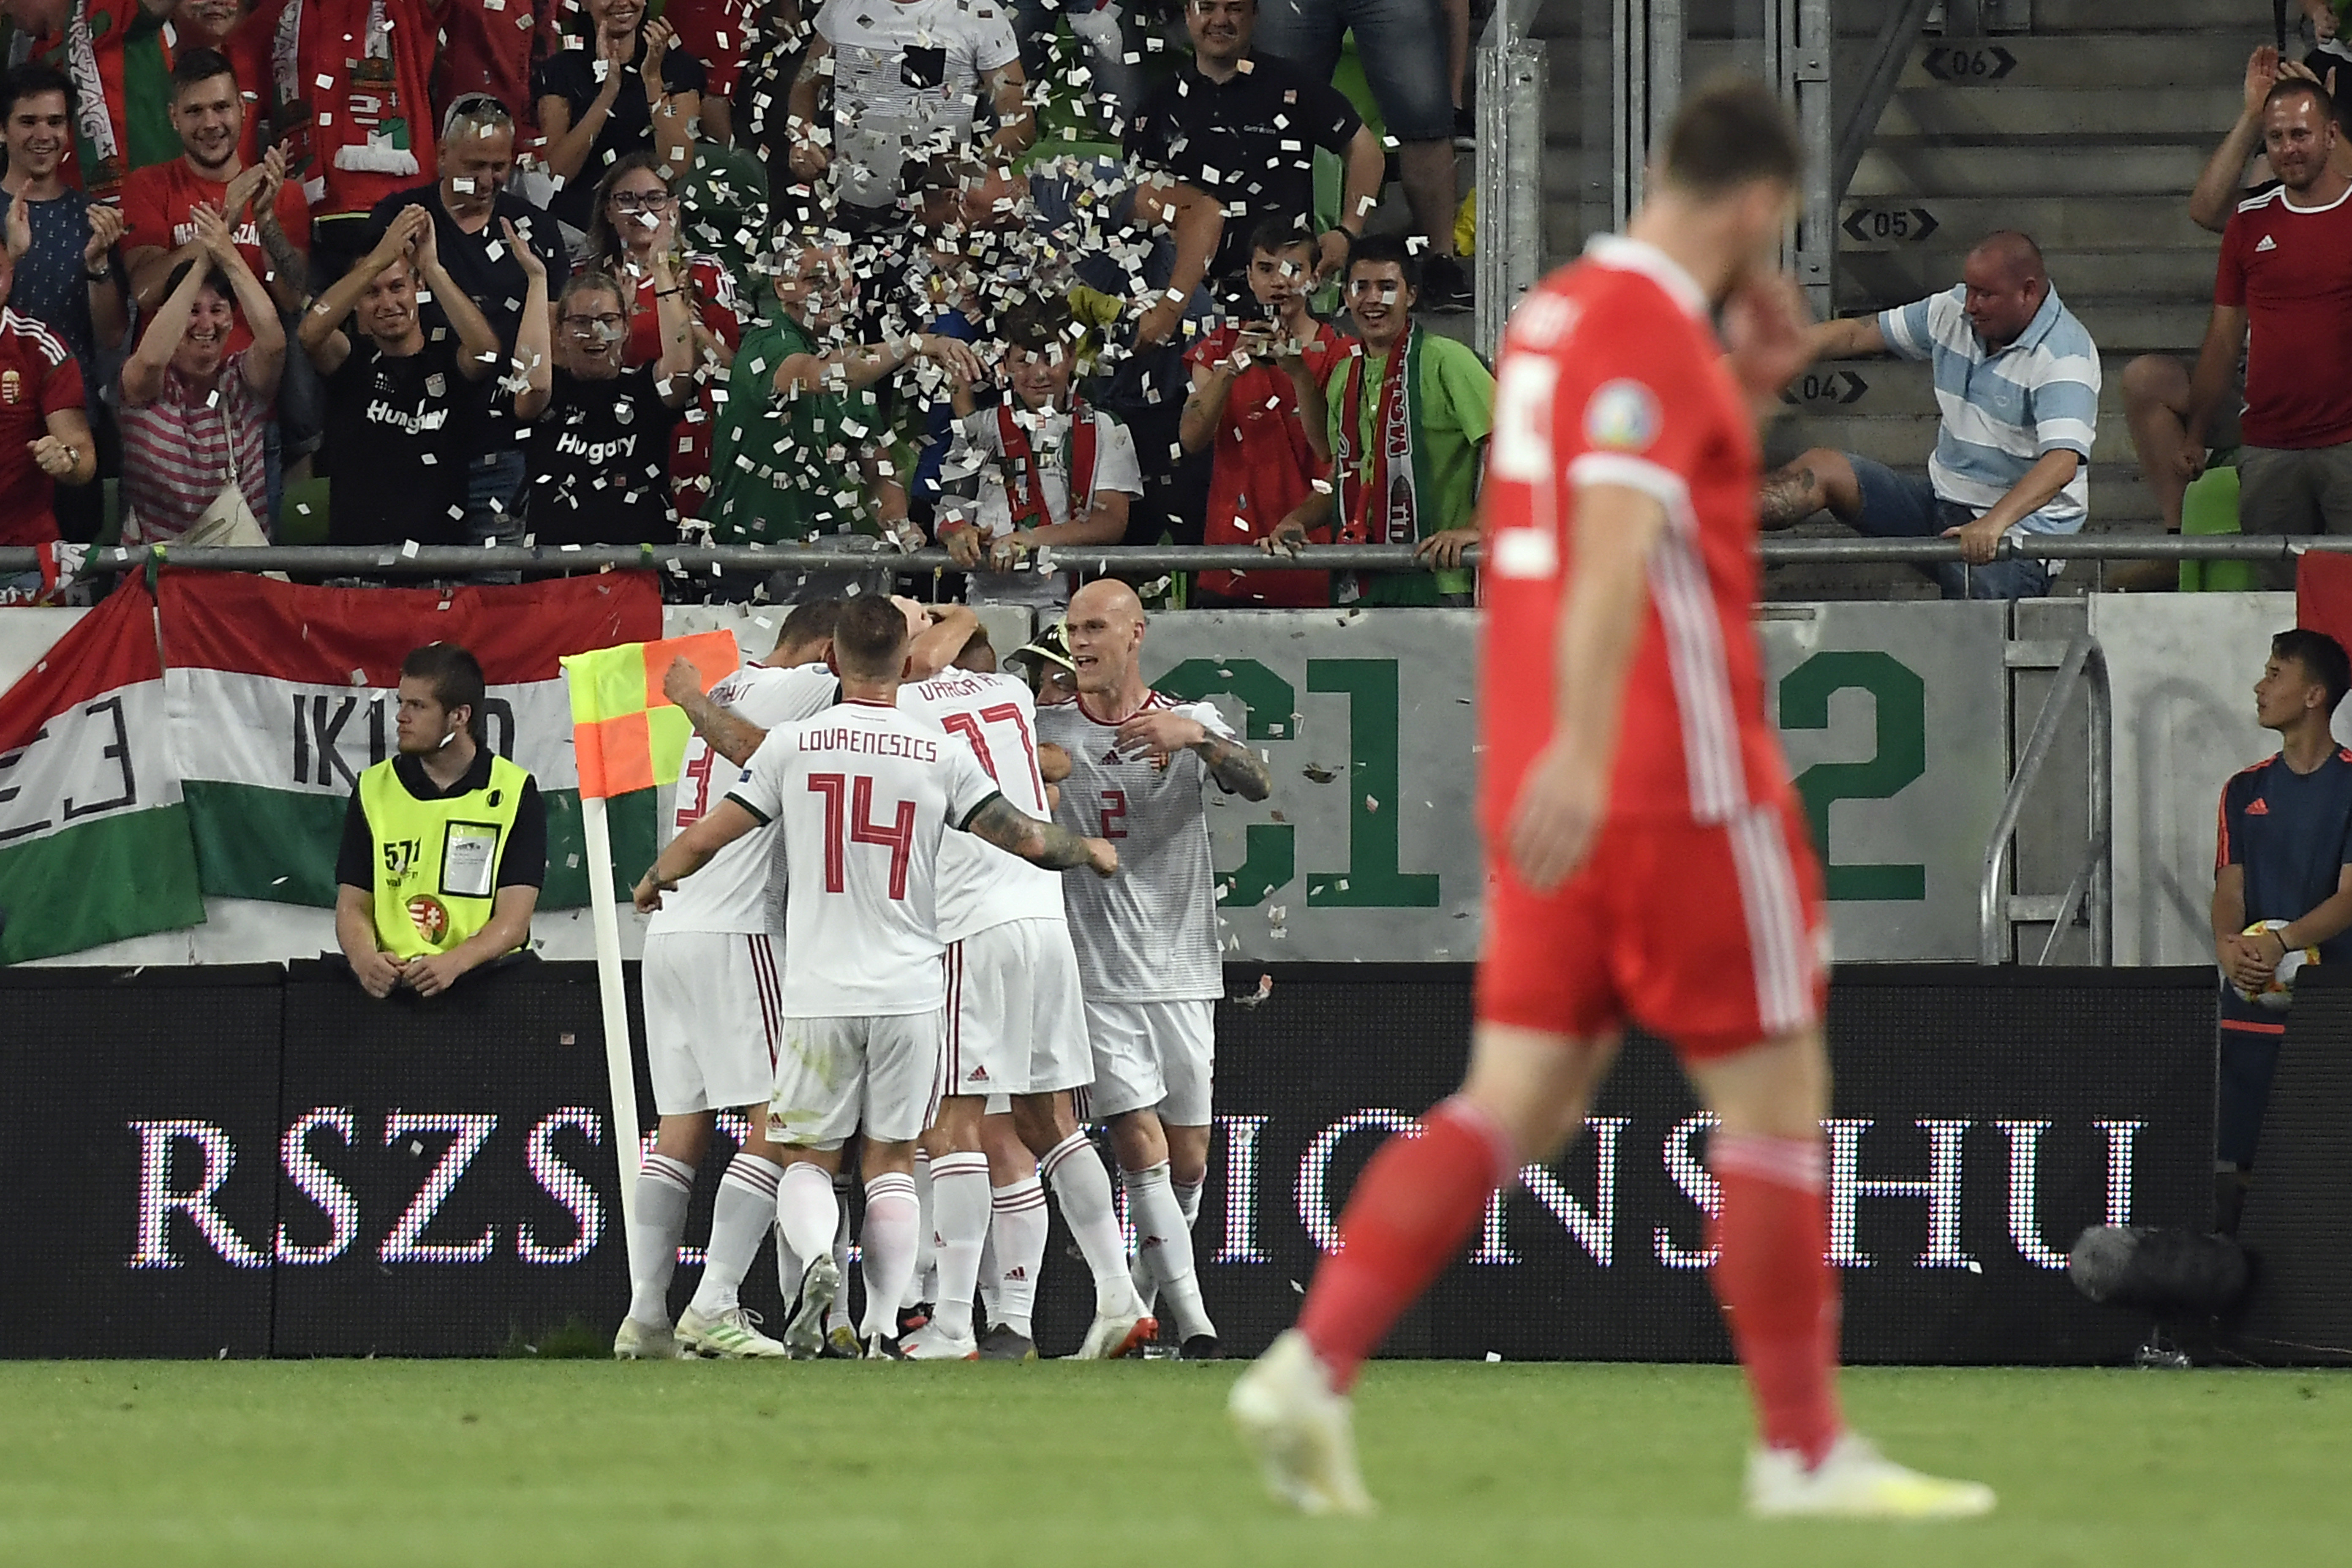 Hungary lies in 42nd position in the latest FIFA list